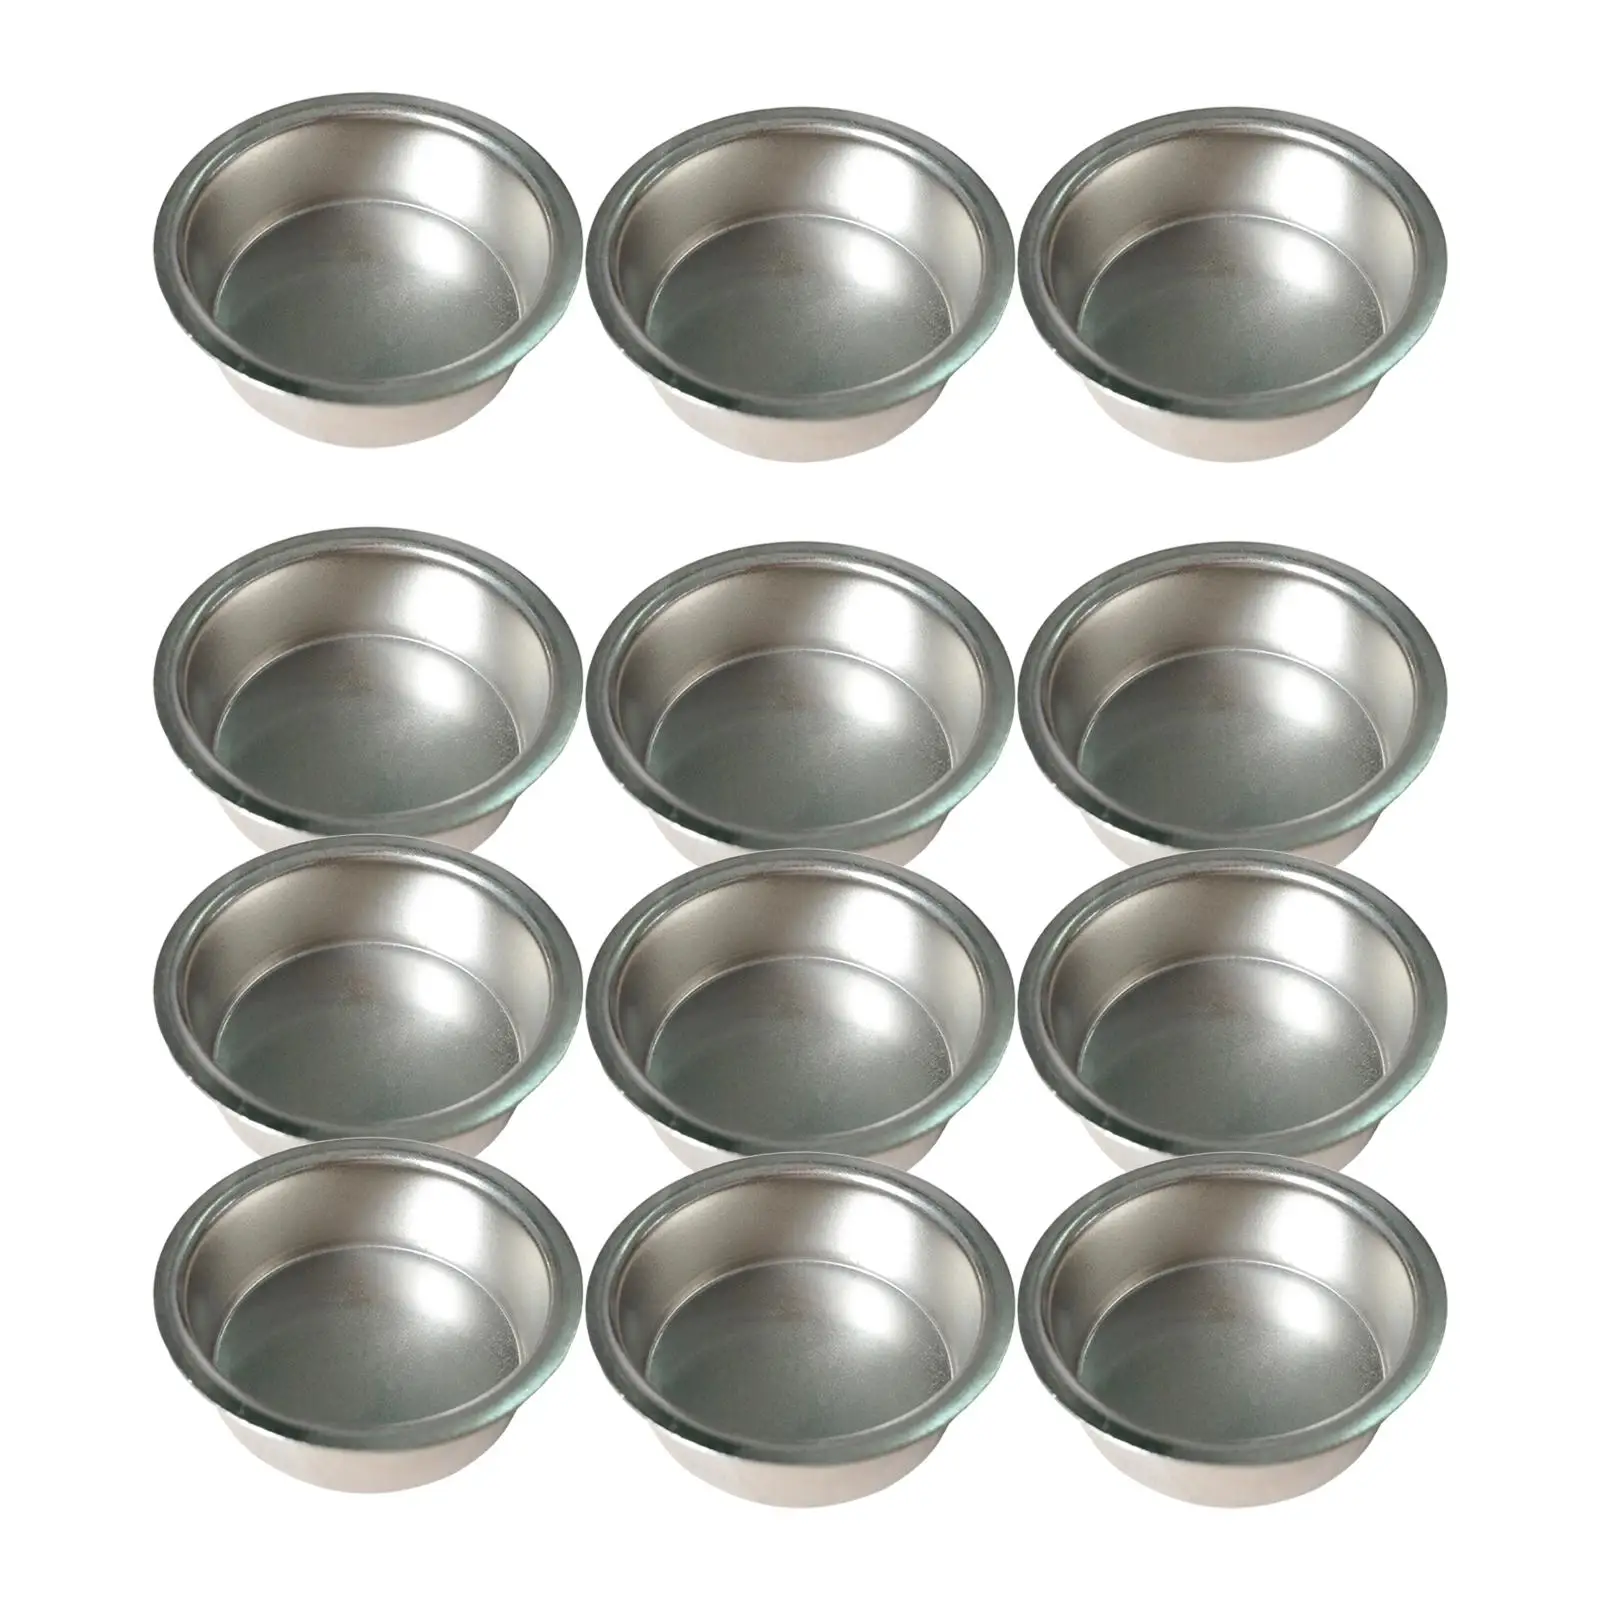 12Pcs Tea Light Candle Cups for Lamp or Candle Making Empty Tea Light Tins